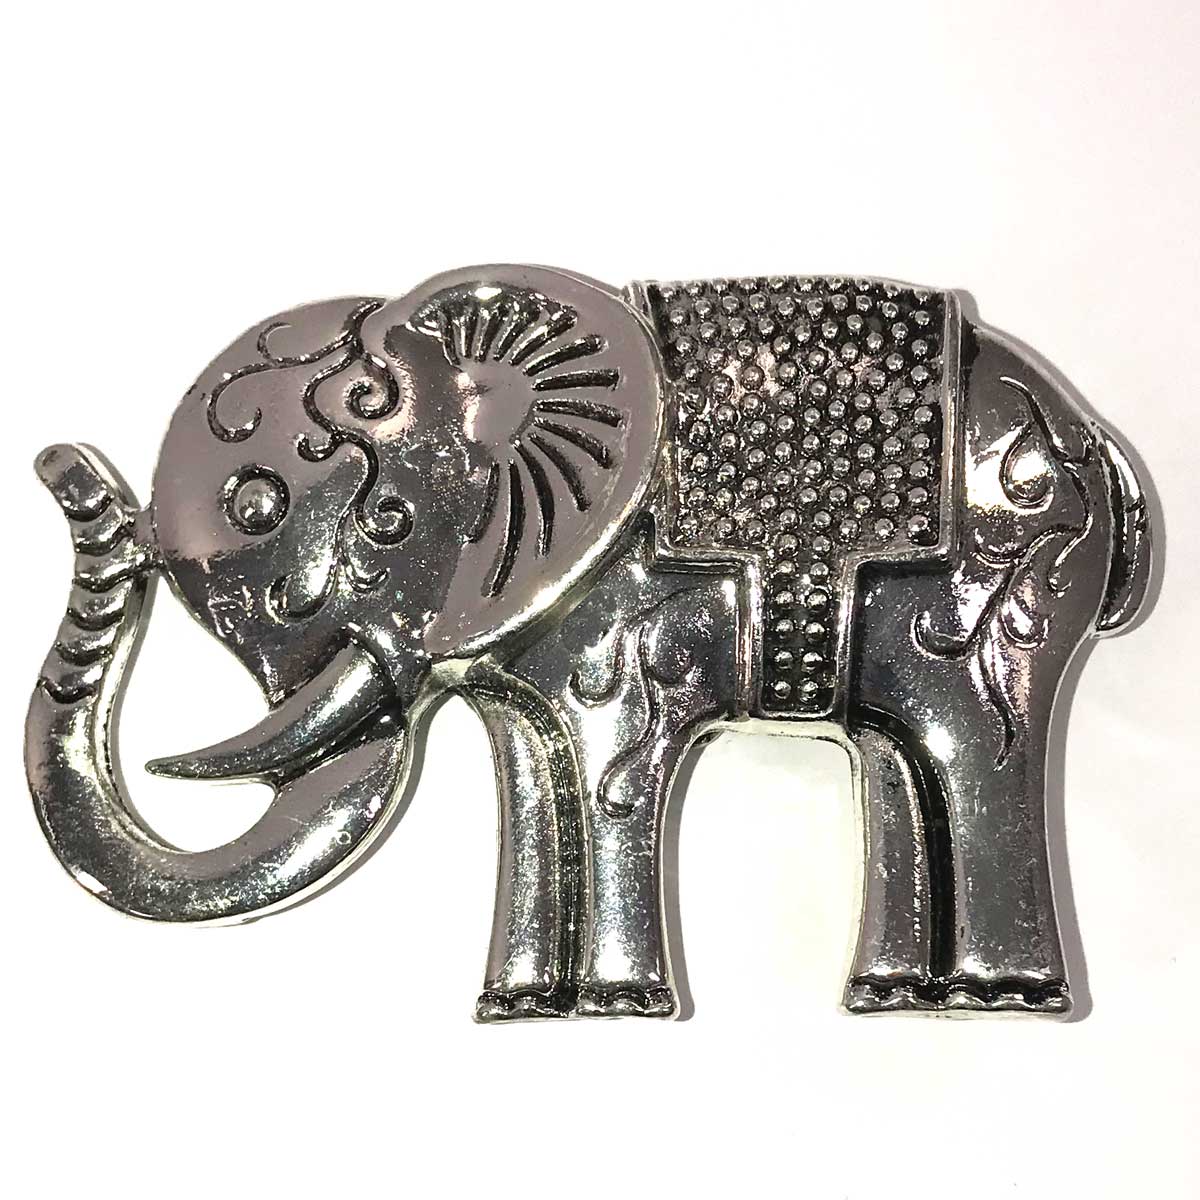 Full body elephant with trunk up. Magnetic Brooch for Scarves Artistic Sculptural shapes add a personality to absolutely anything you wish to put your stamp on! The Super Strong Magnet is enough for a jacket lapel! Use to hold a sarong or cardigan together.  Great to adorn a hat or to hold a scarf in place with Fabric Safe Magnet.